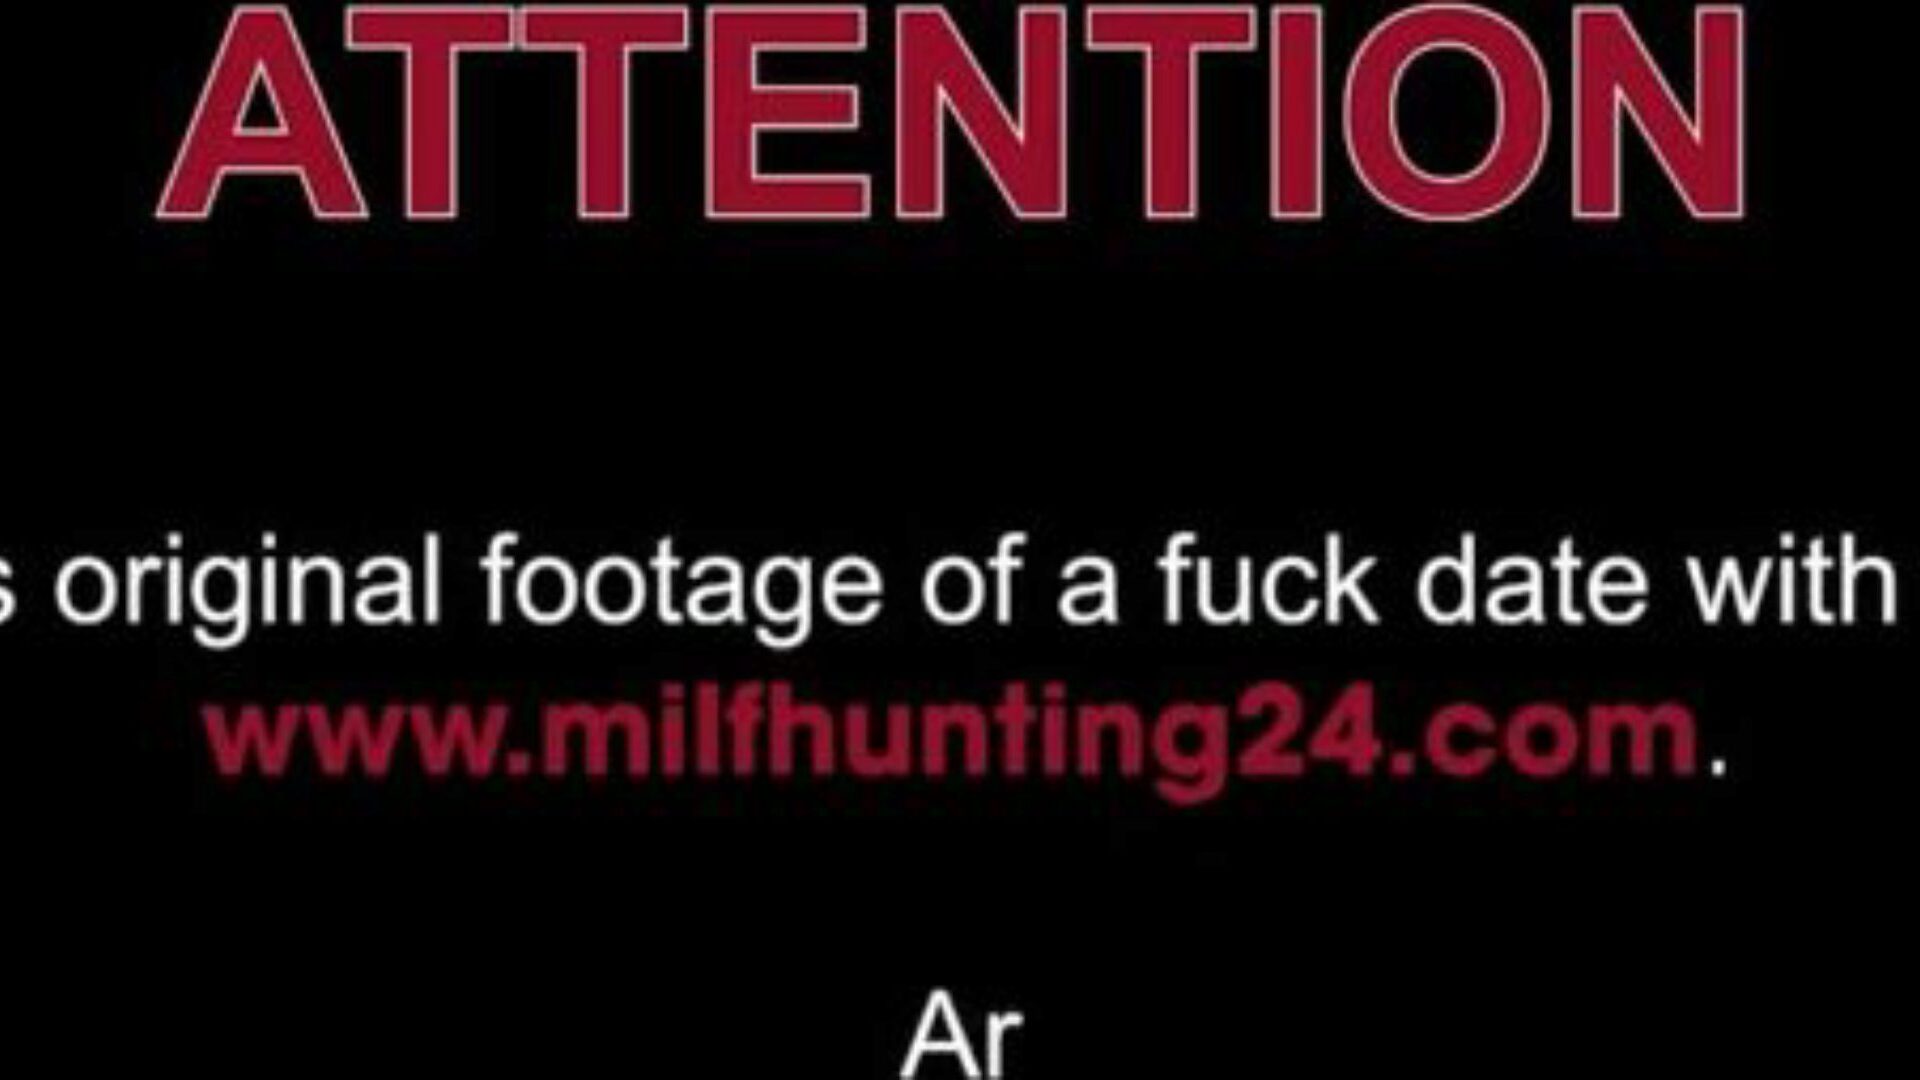 Julia Exclusiv pumped rock hard in the ass by the Milf Hunter! milfhunting24